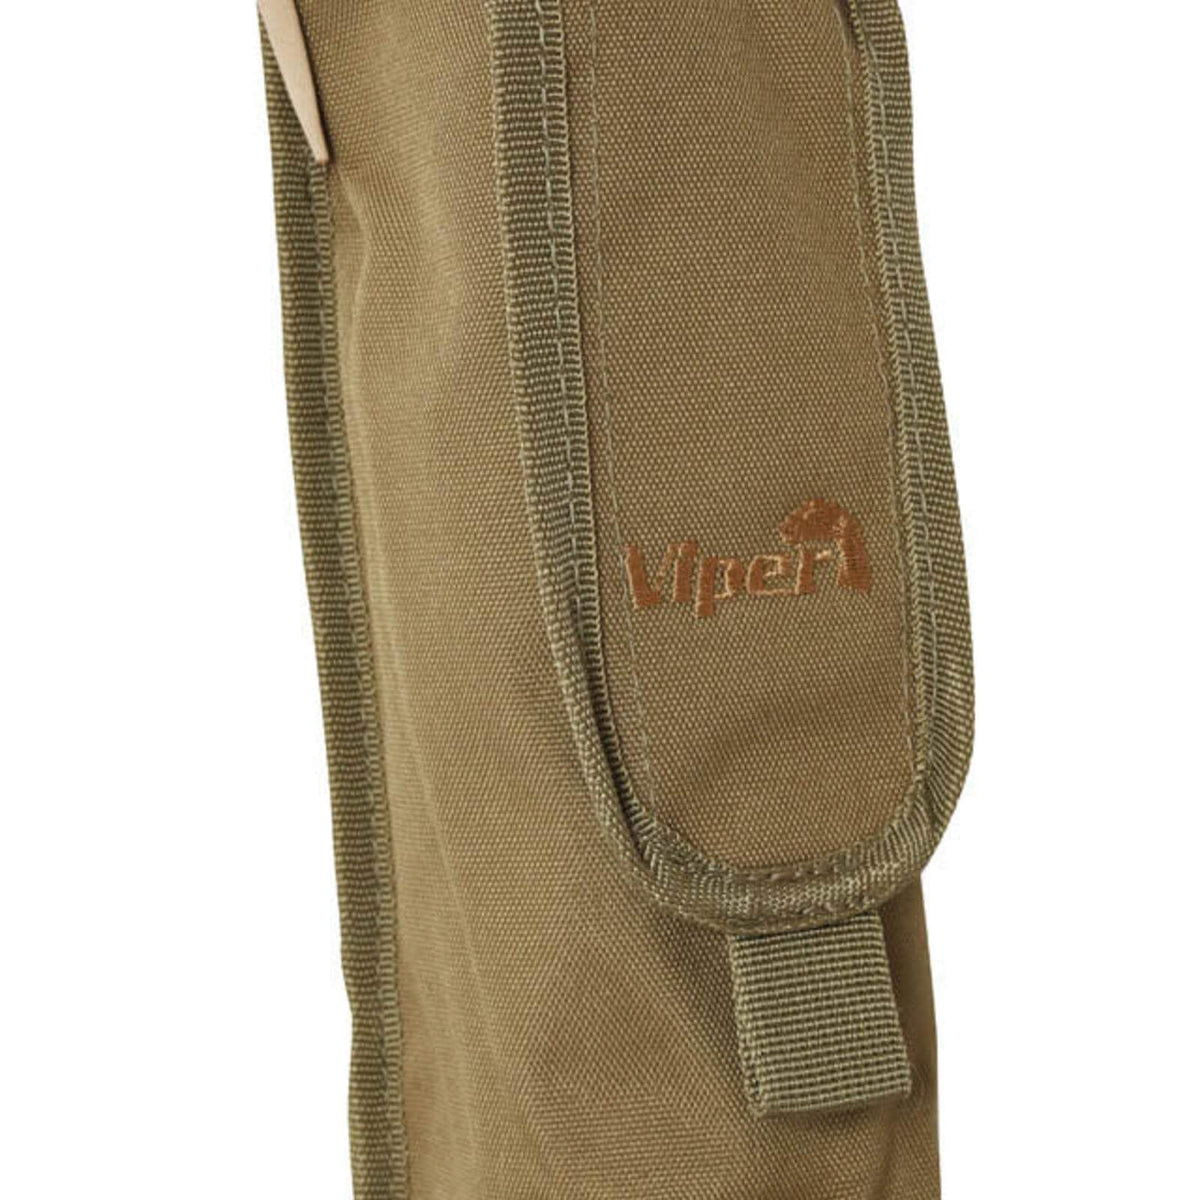 Viper P90 Mag Pouch Single - Coyote — AirsoftEire